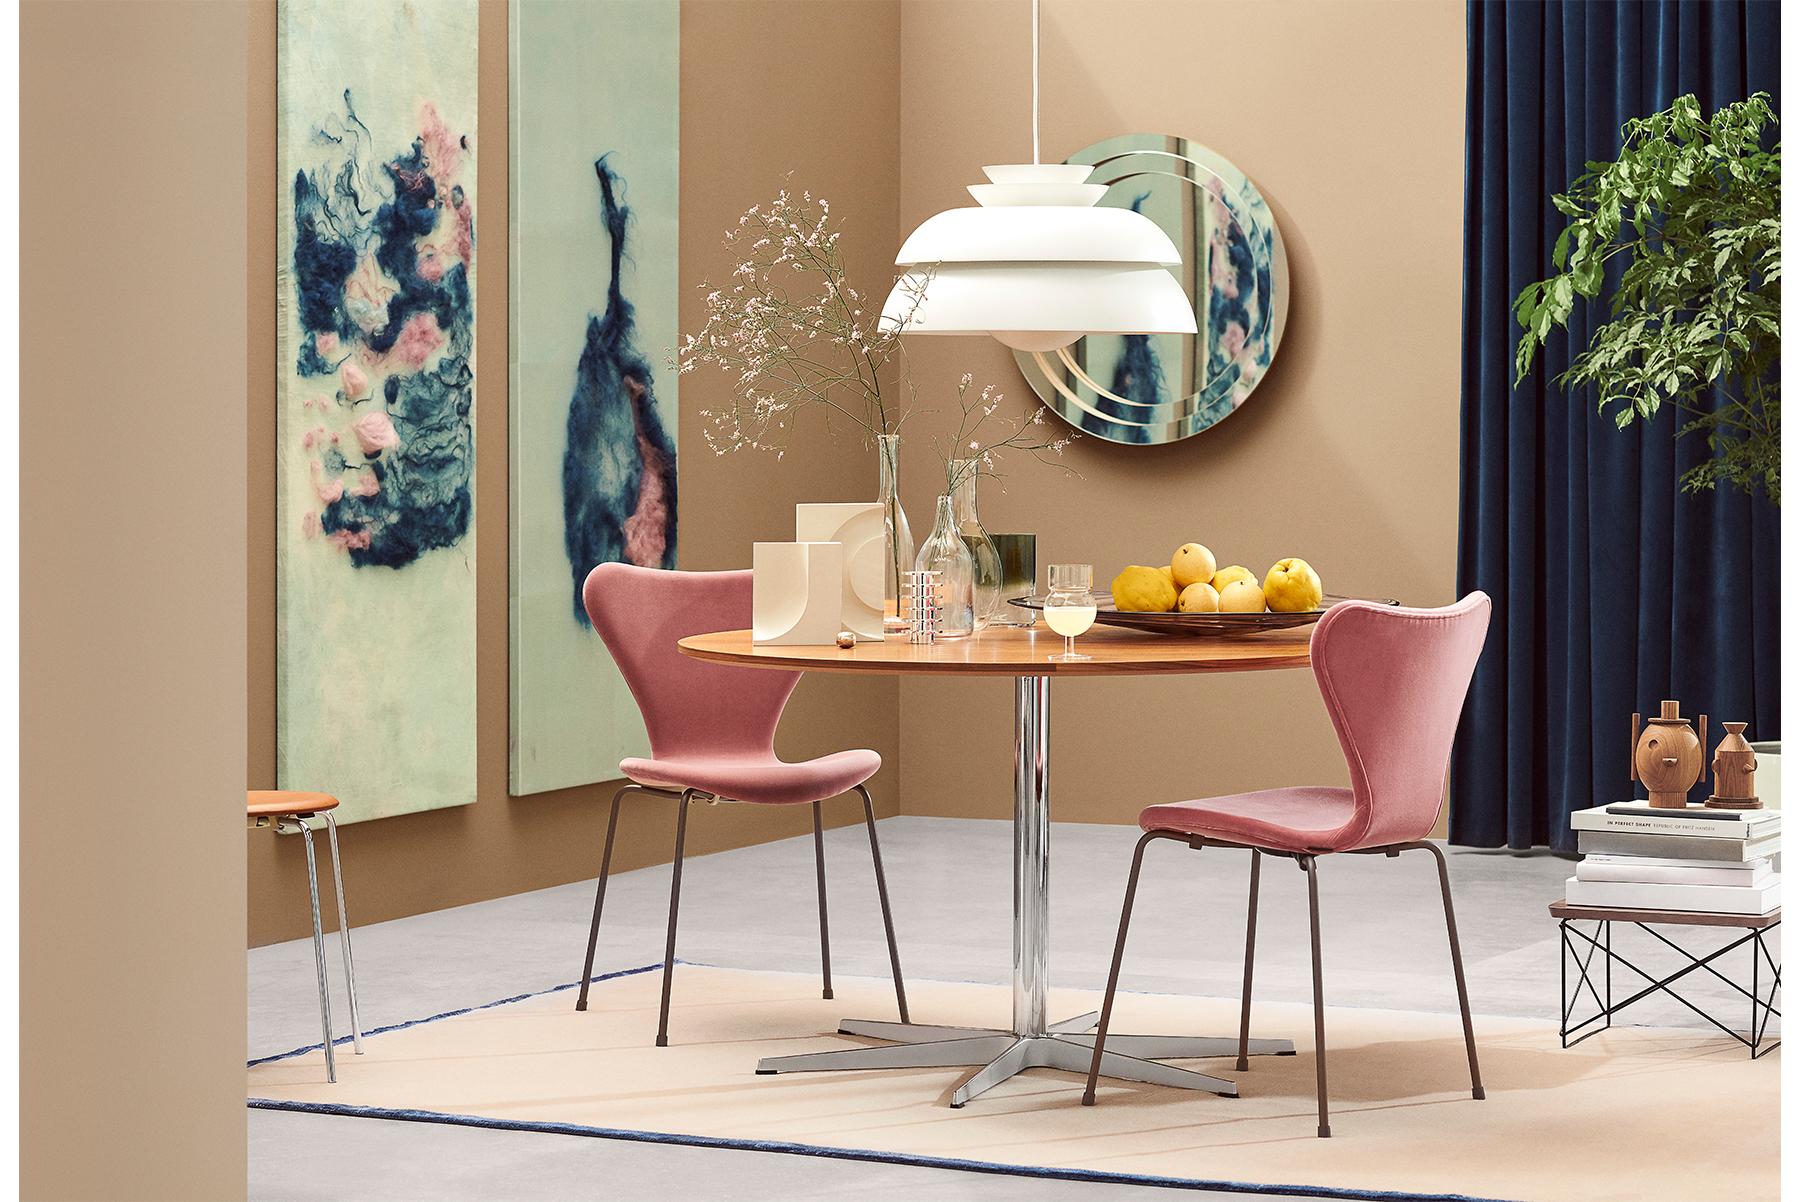 Soft, Italian velvet makes the fully upholstered Series 7 particularly luxurious. Powder coated legs in Brown Bronze add nuance and subtle sophistication.

Series 7 Velvet Edition is available in 3 vibrant colours: Misty rose, autumn red and grey